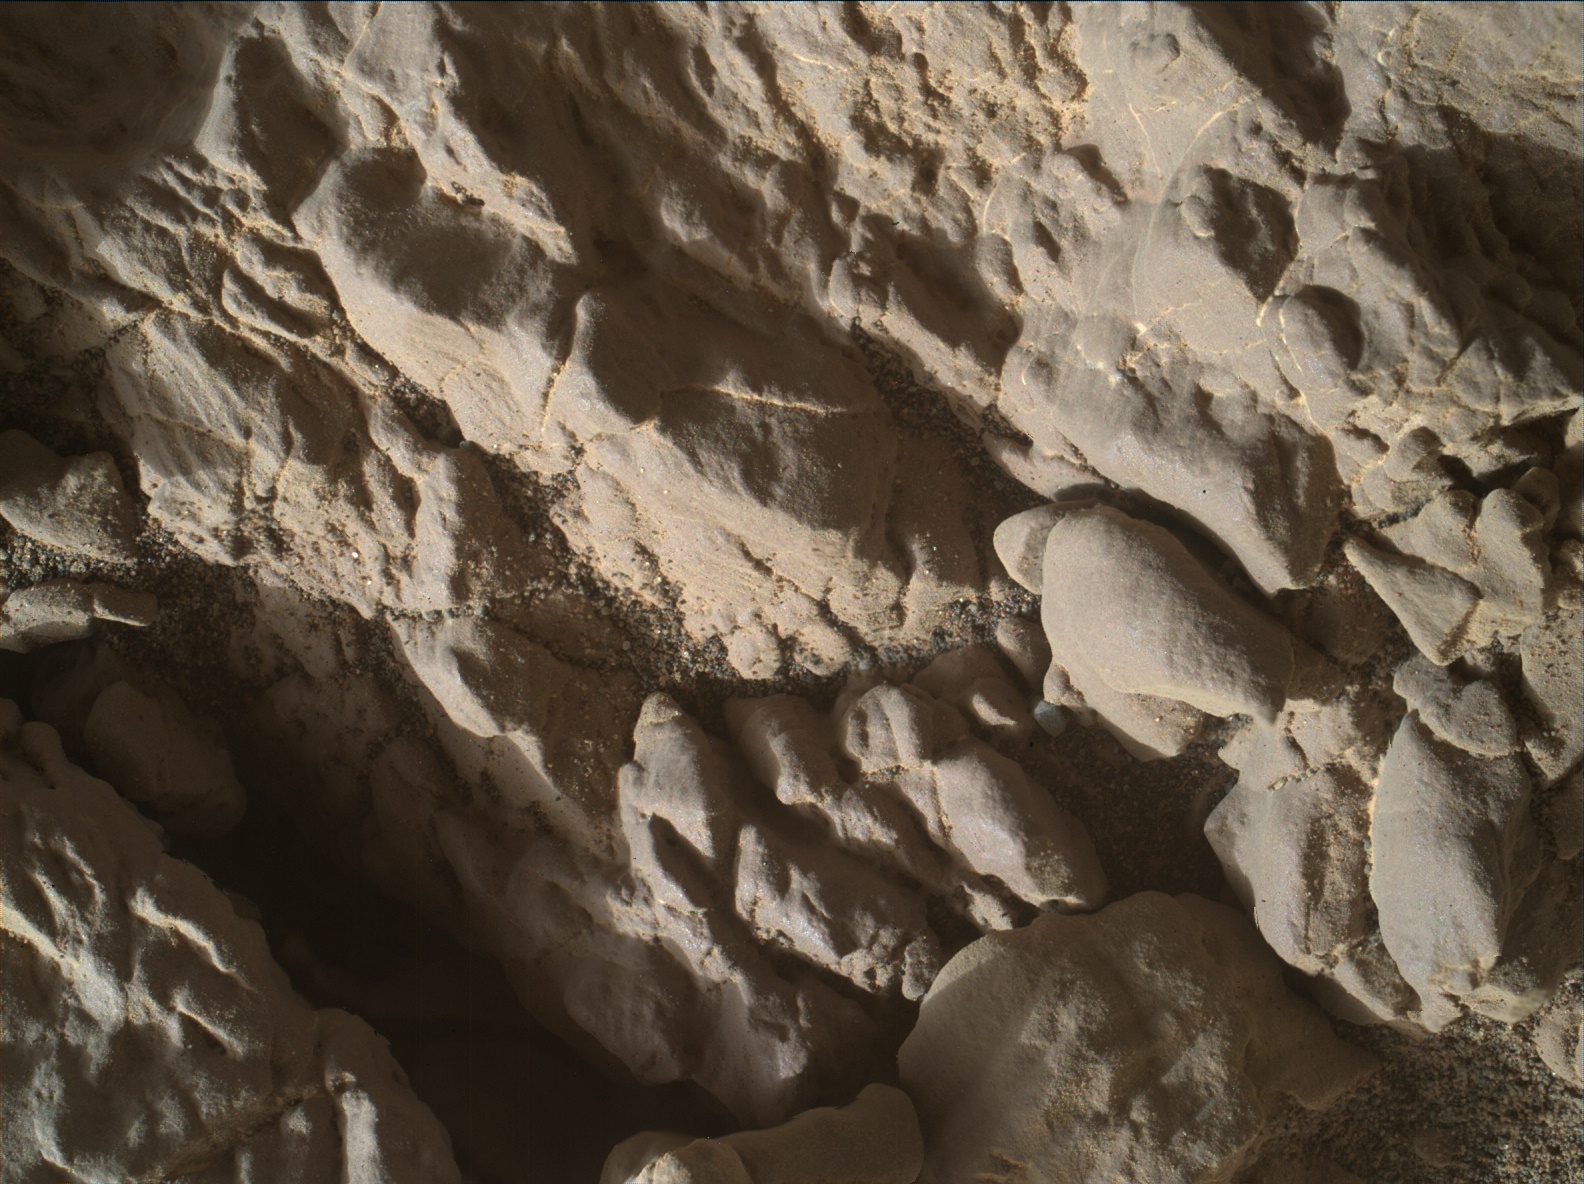 Nasa's Mars rover Curiosity acquired this image using its Mars Hand Lens Imager (MAHLI) on Sol 1942